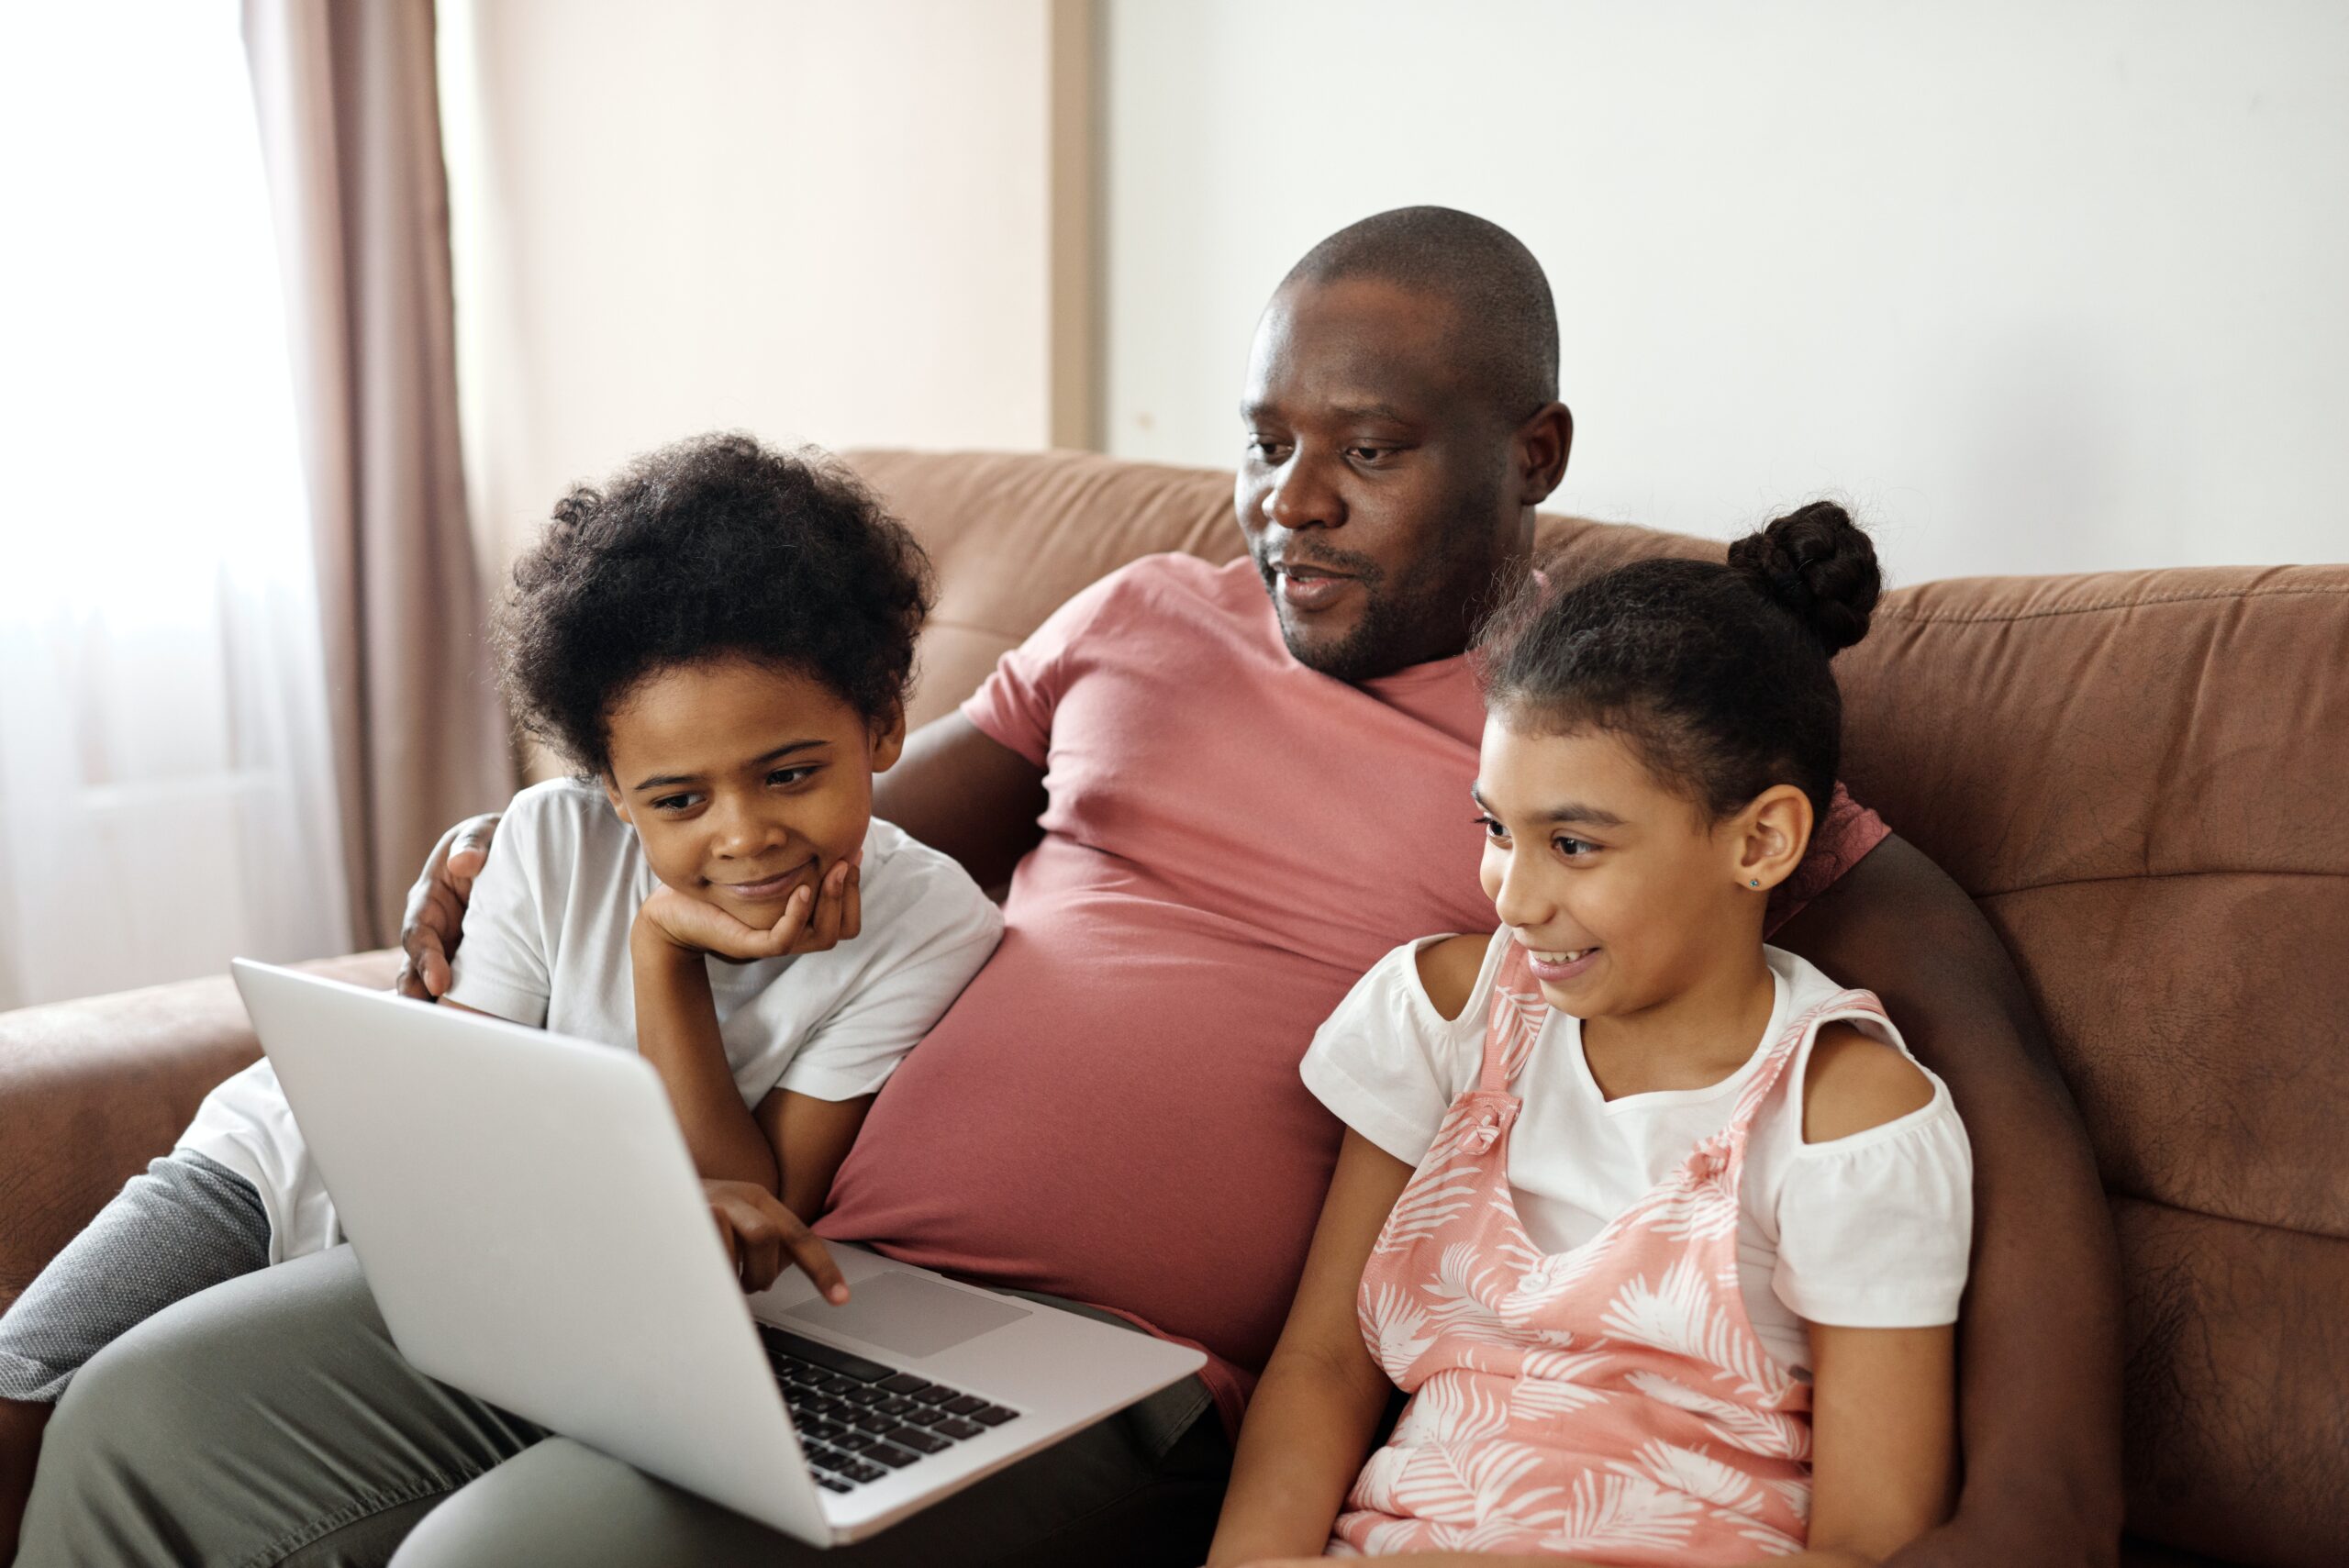 father-and-children-looking-at-a-laptop-4260749